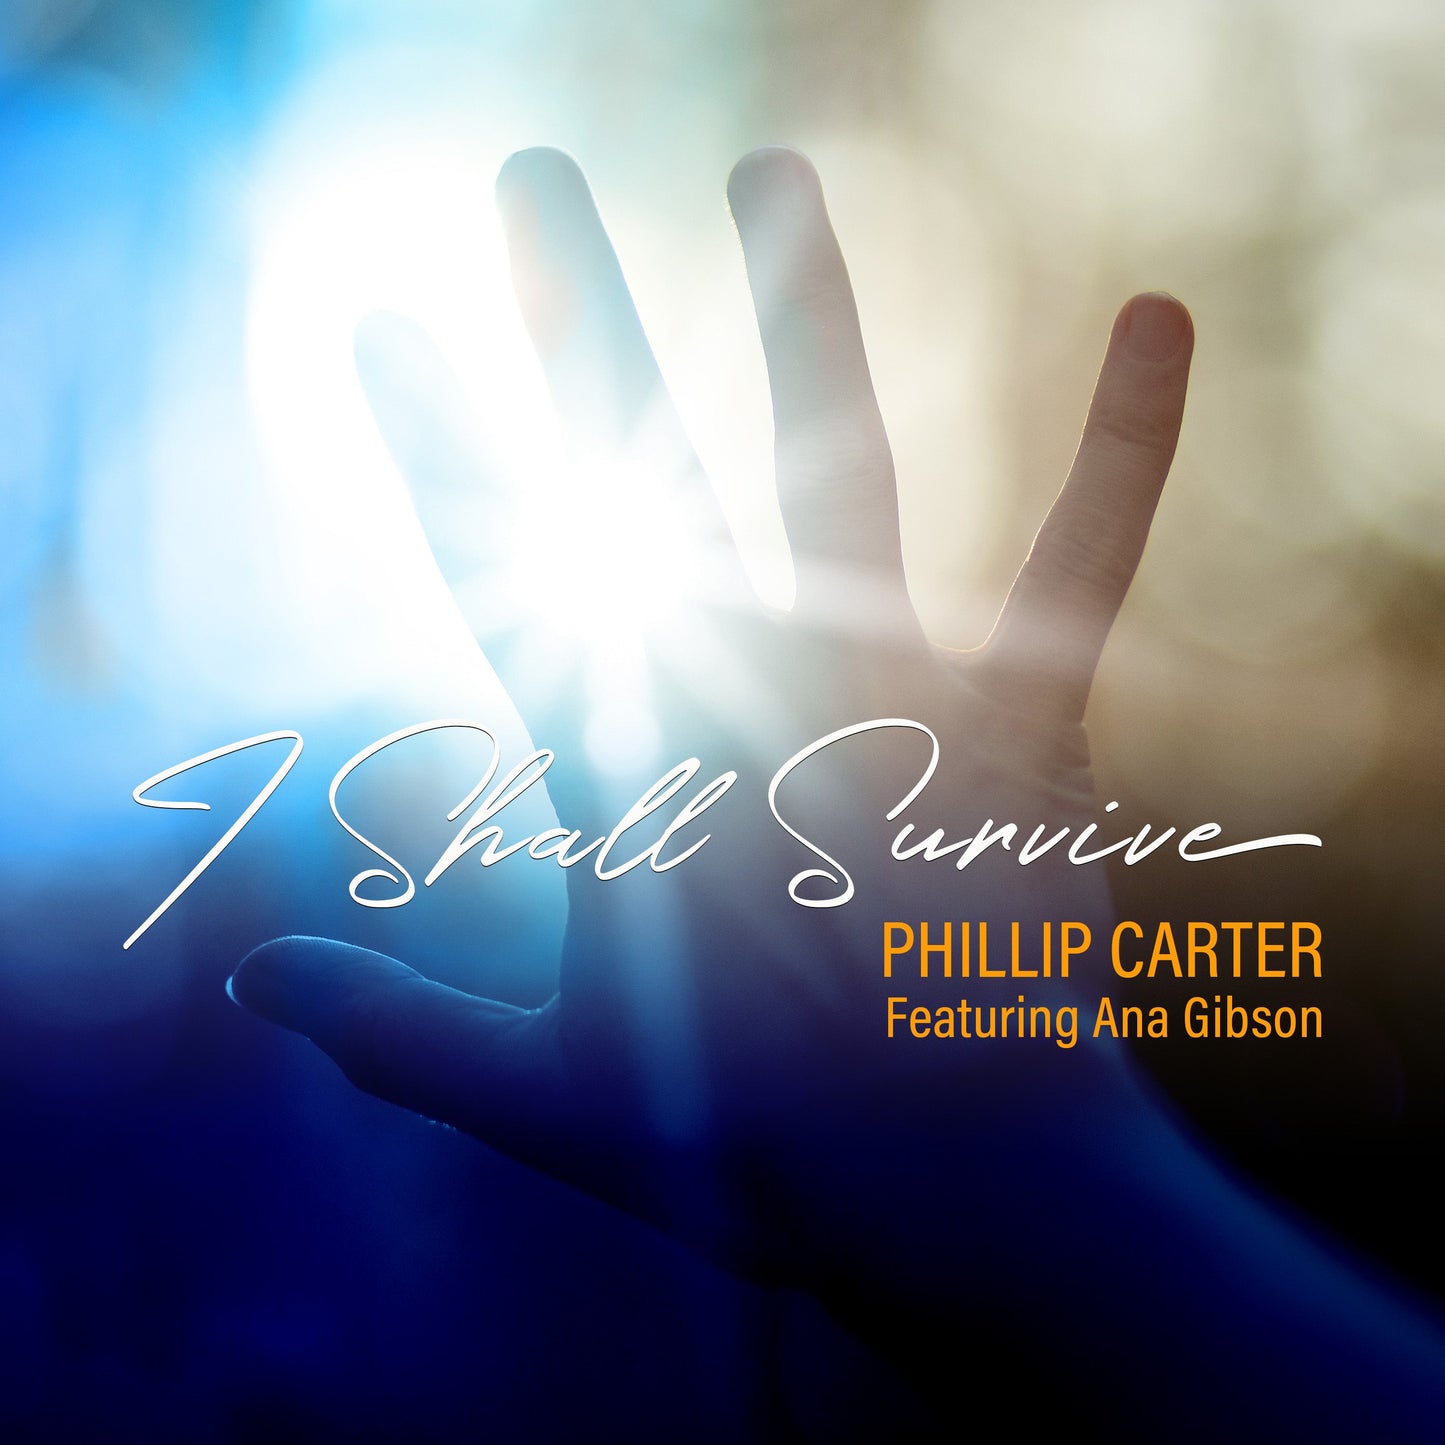 I Shall Survive by Phillip Carter Featuring Ana Gibson